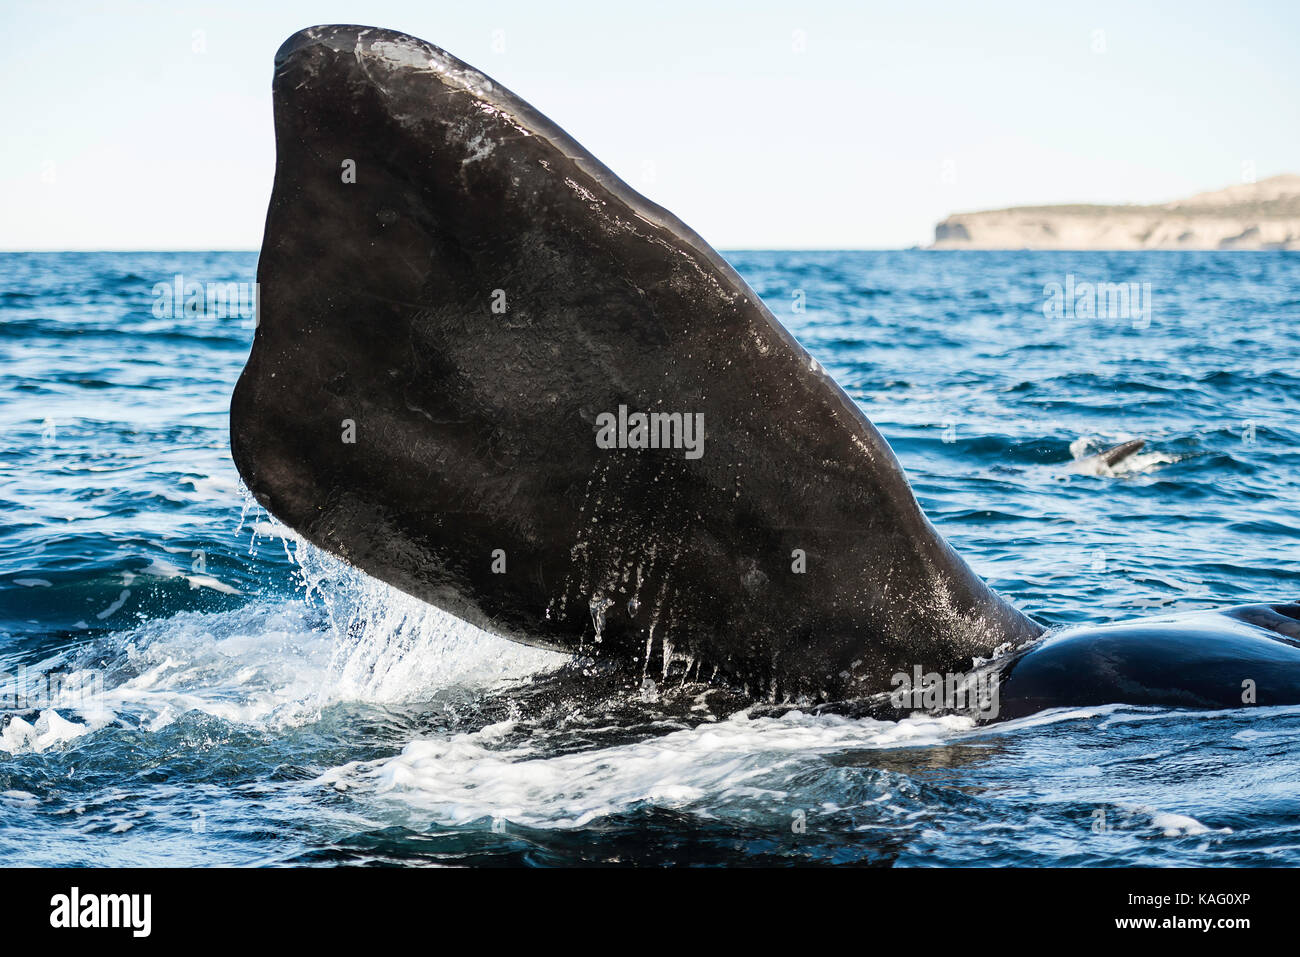 Close up view of the pectoral fin of a southern right whale